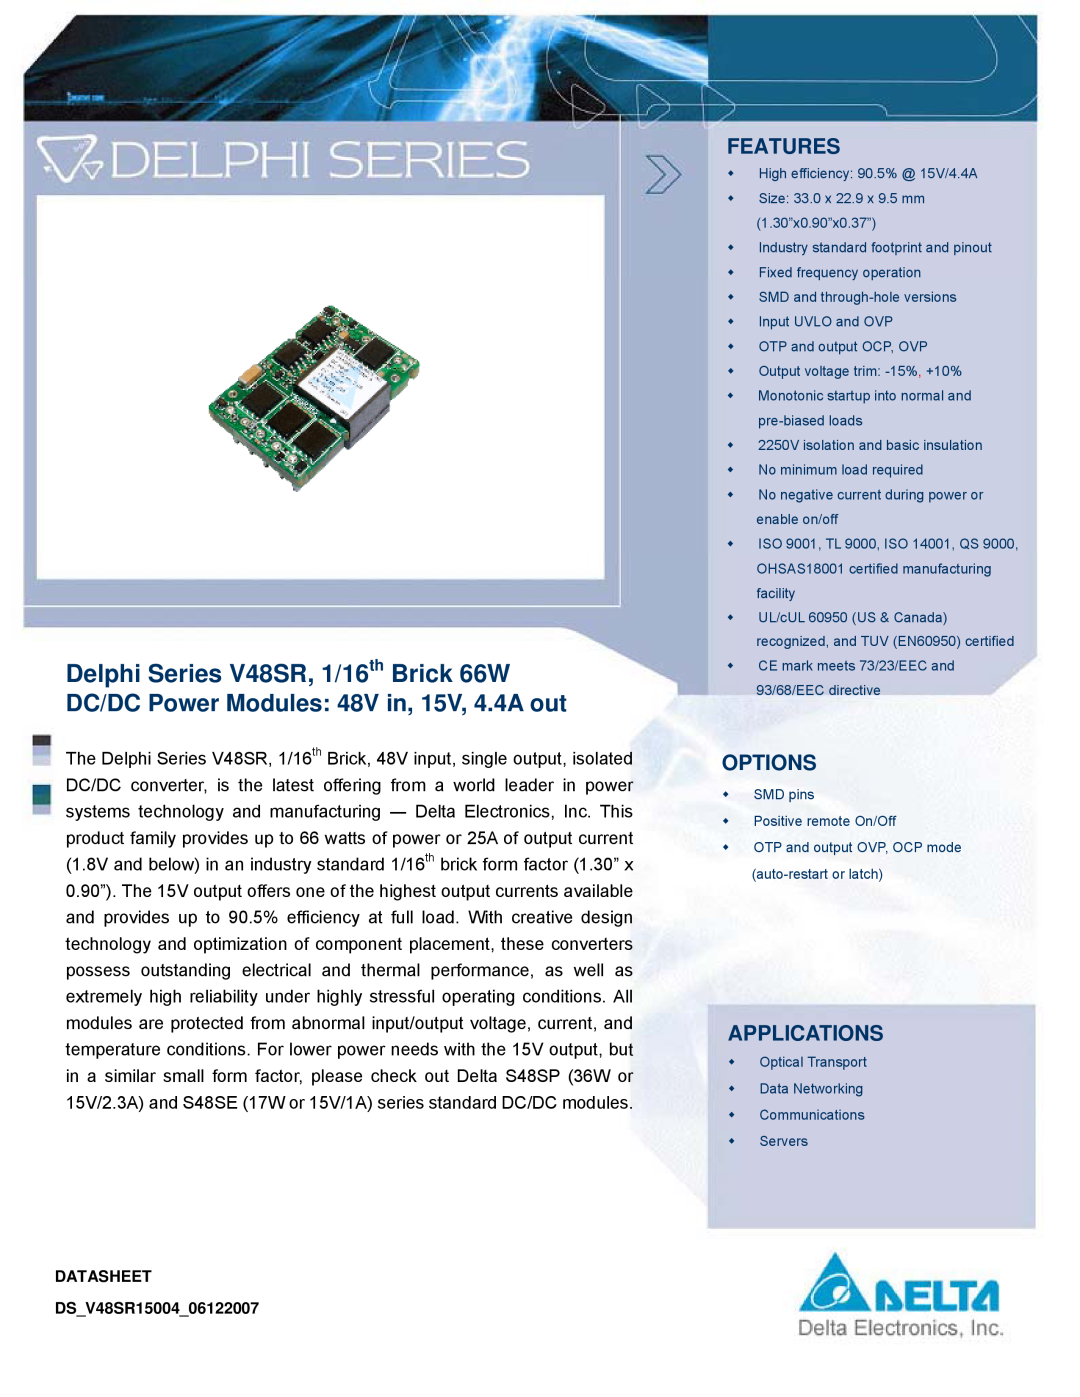 Delta Electronics manual Delphi Series V48SR, 1/16th Brick 66W, DC/DC Power Modules 48V in, 15V, 4.4A out, Features 